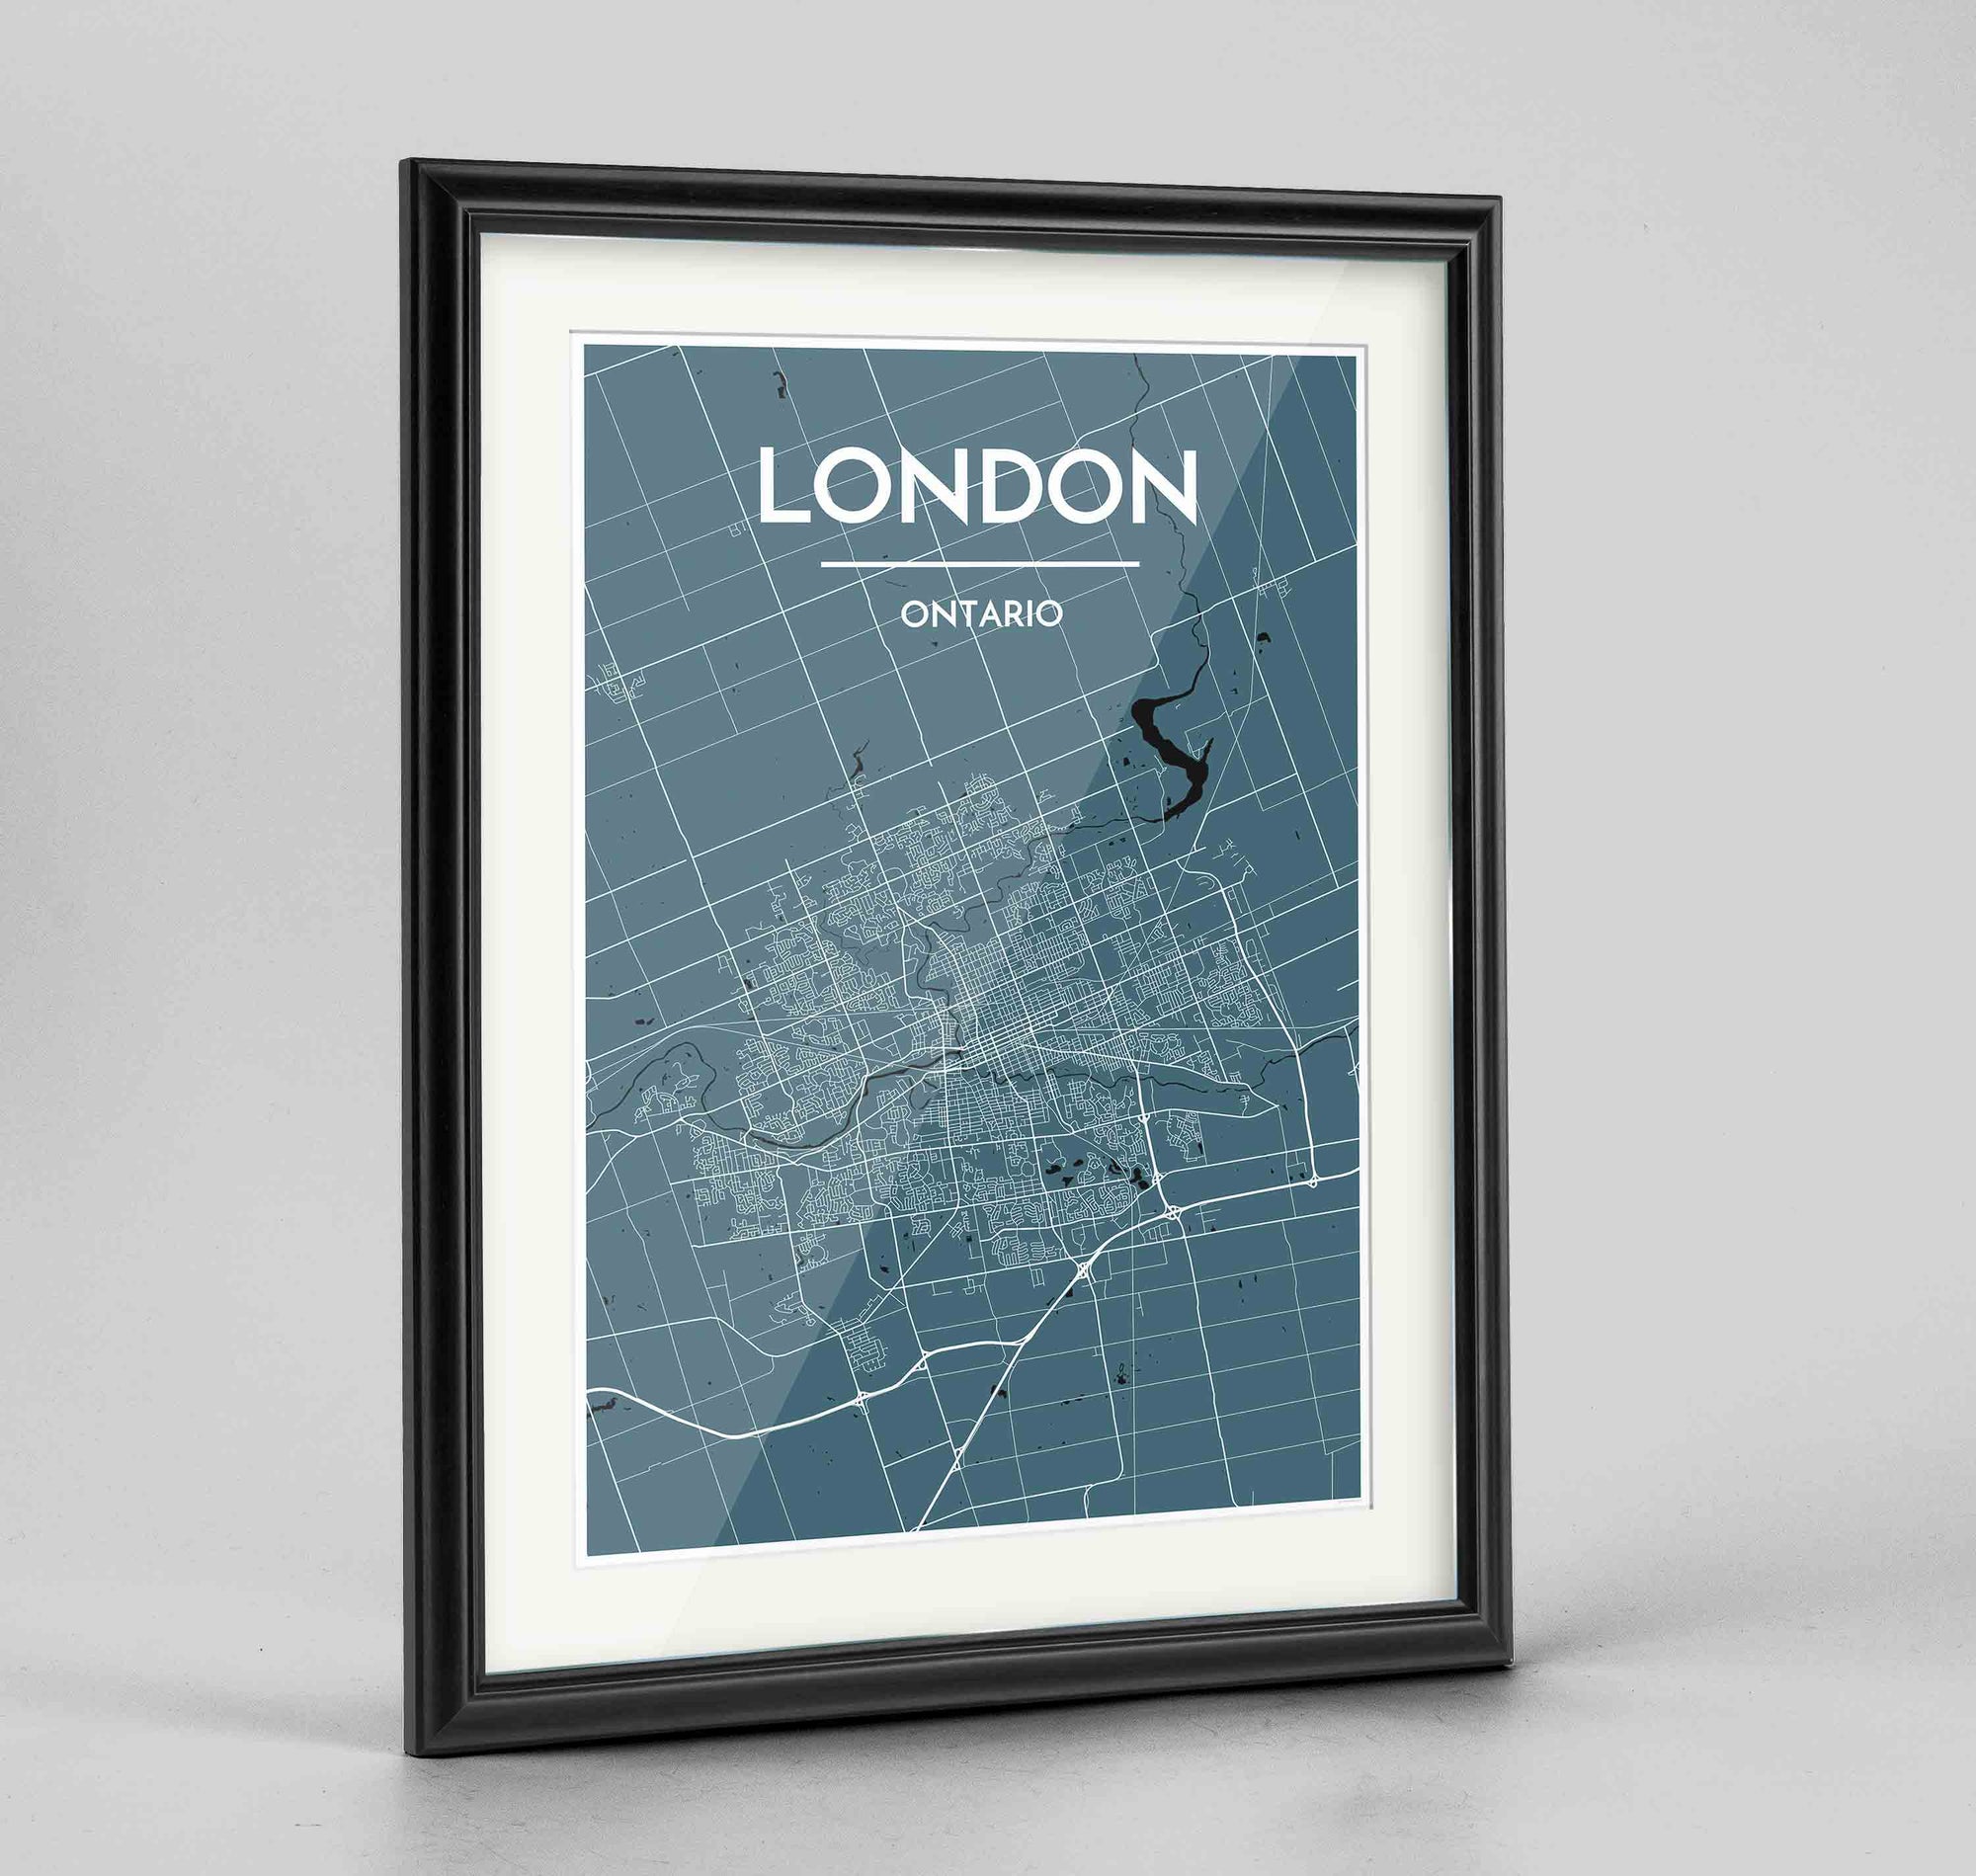 Framed London Ontario City Map 24x36" Traditional Black frame Point Two Design Group